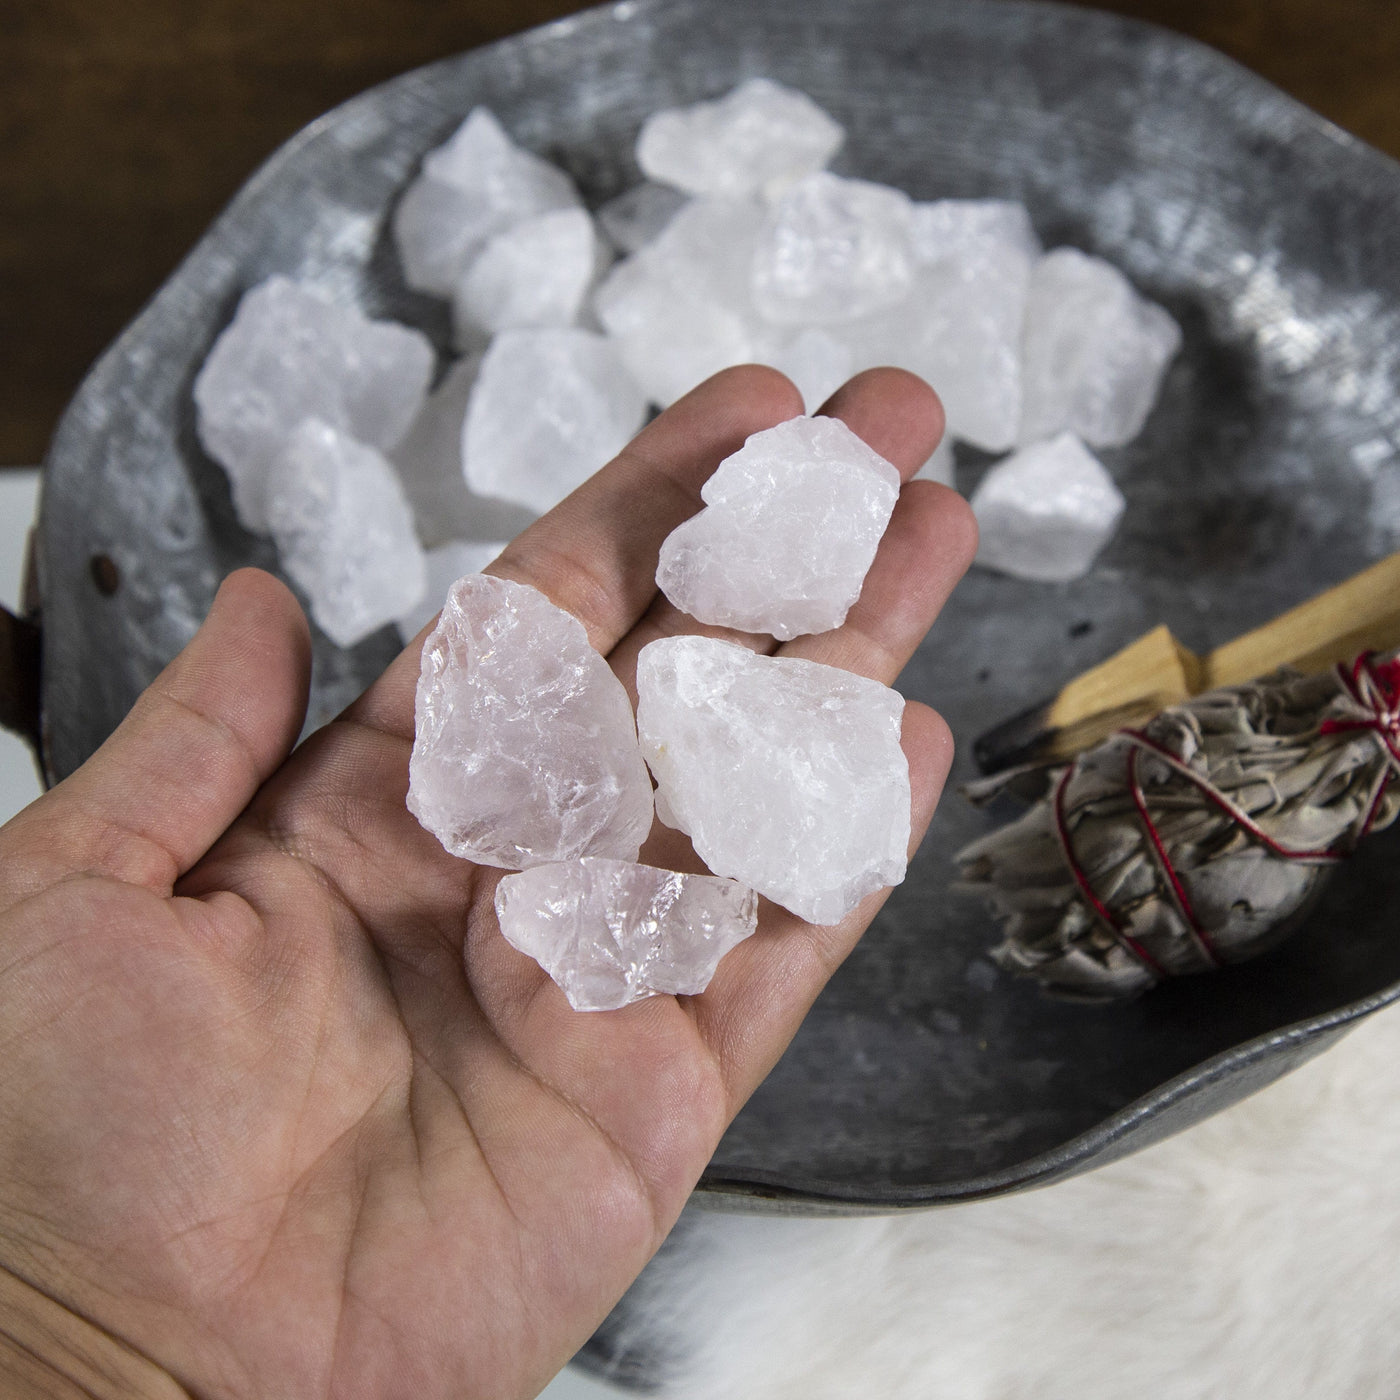 rough crystal stones in a hand